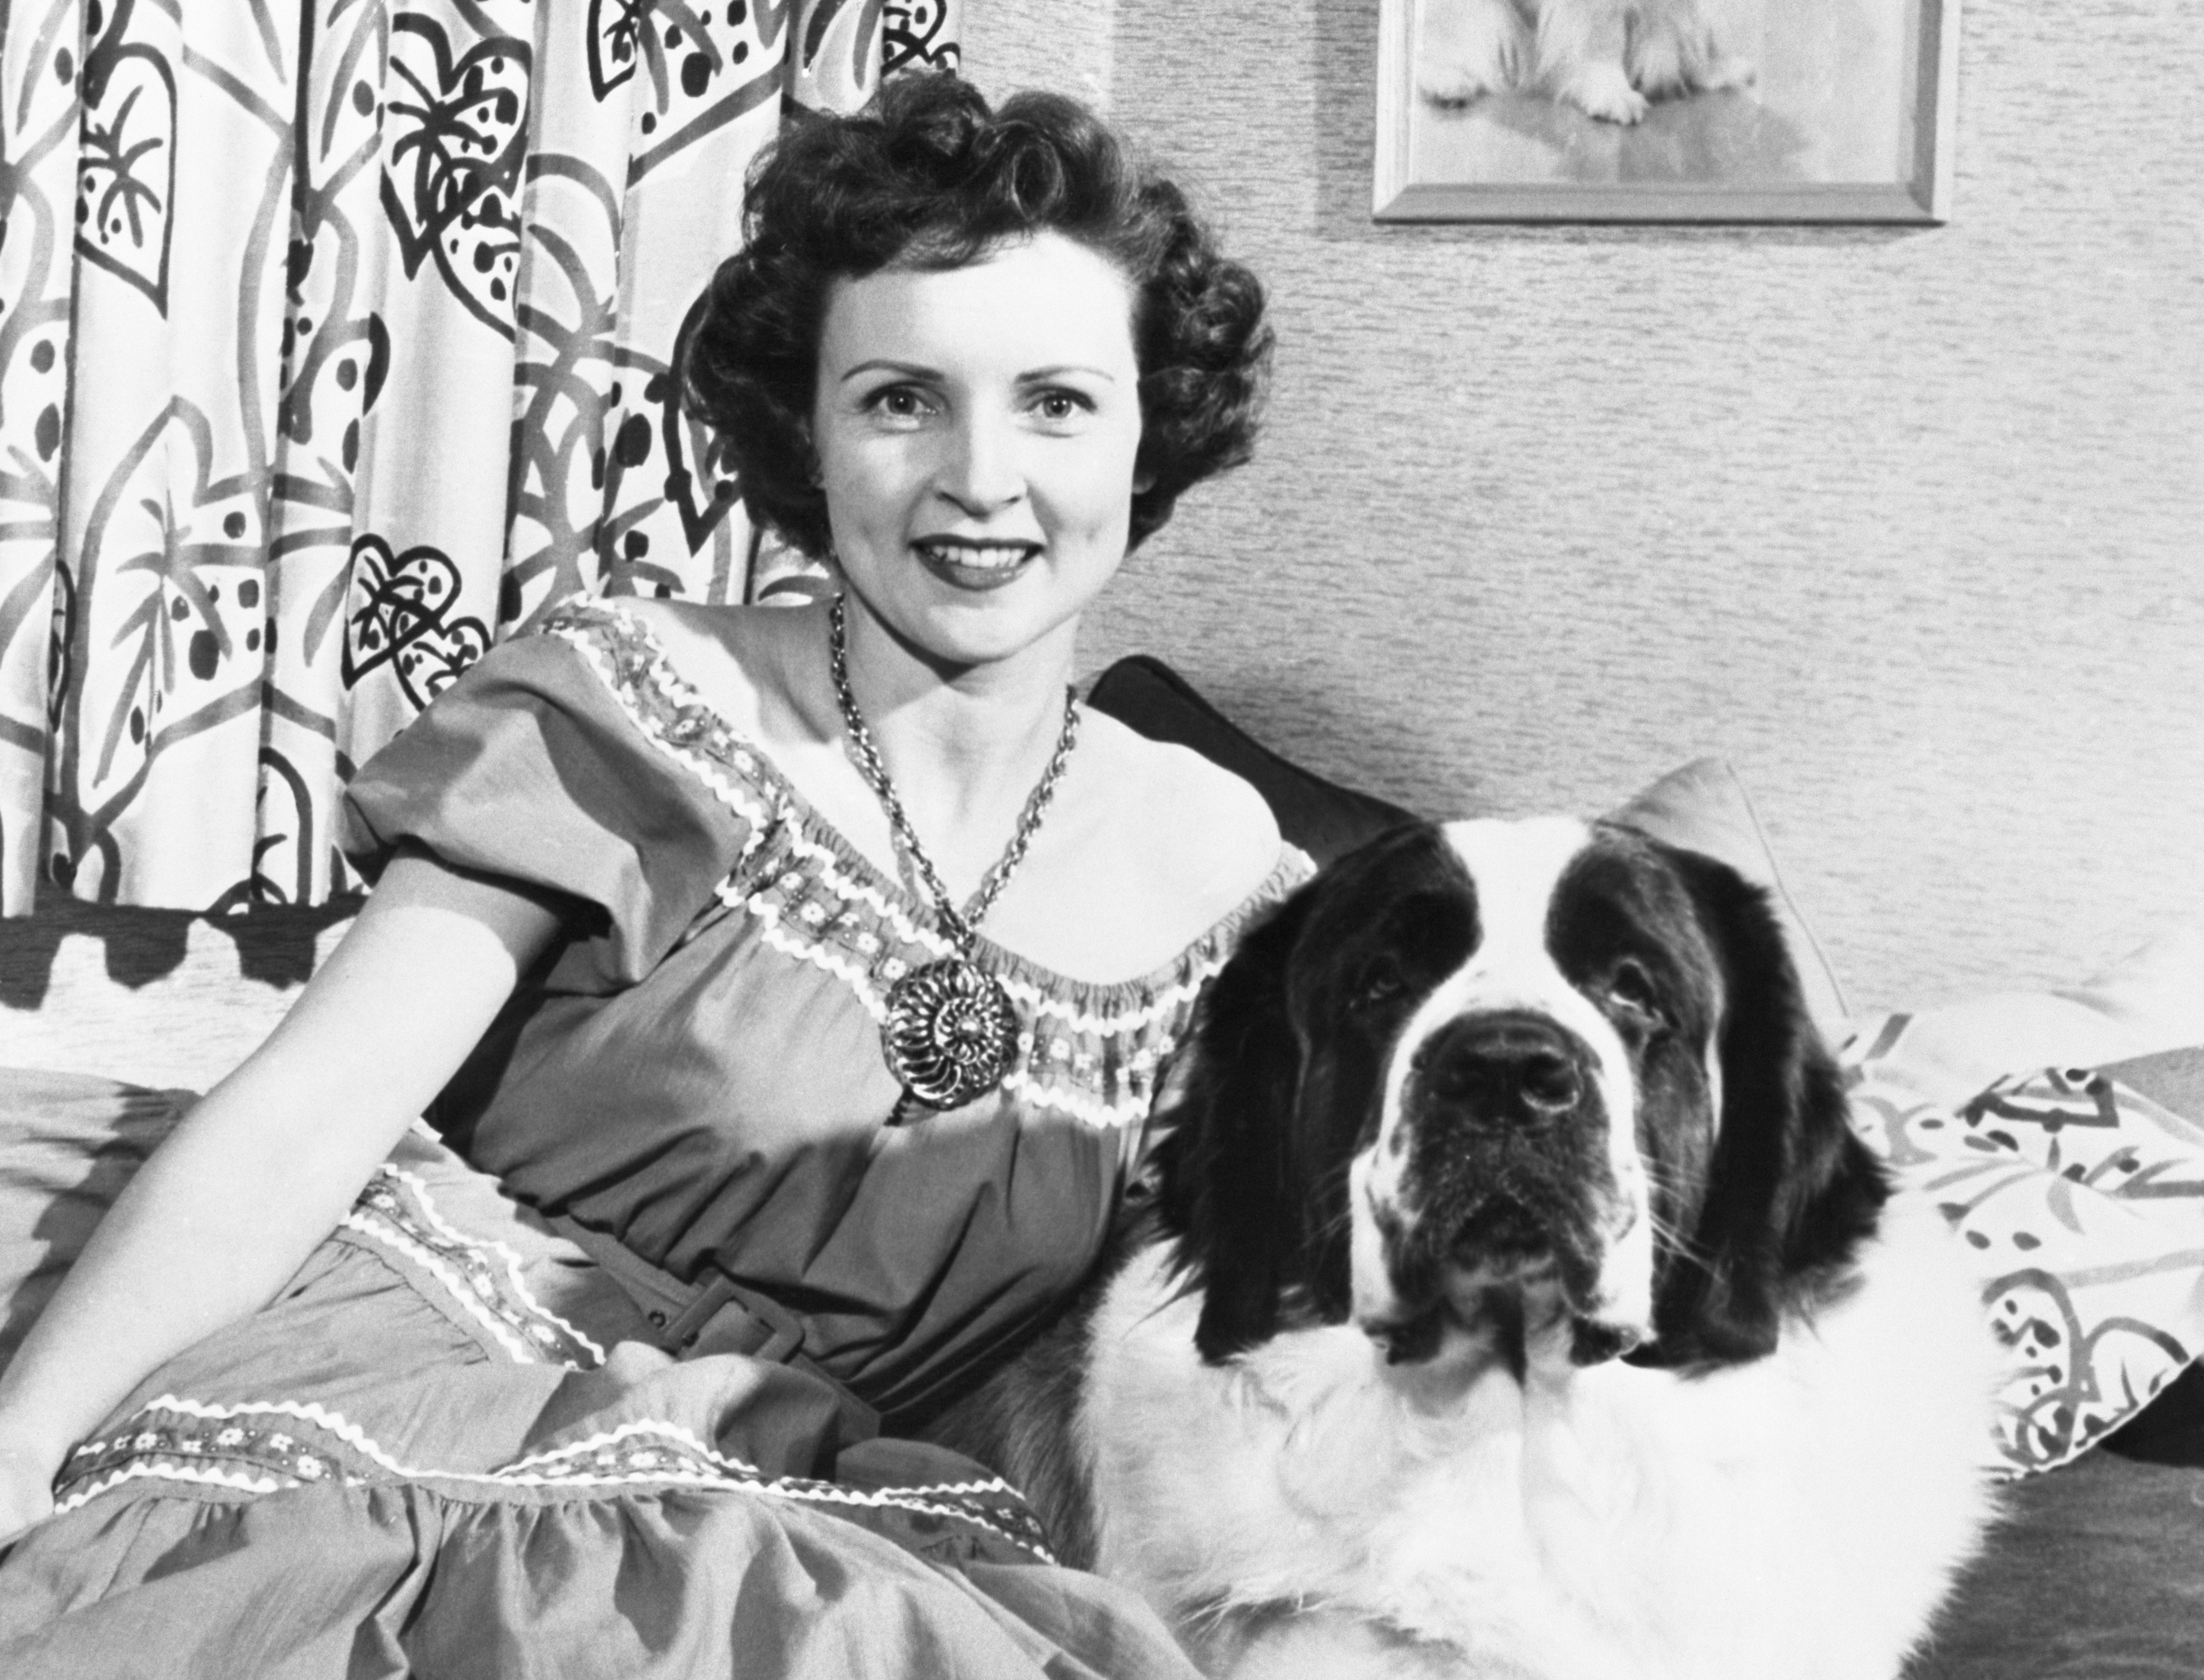 Betty White with her St. Bernard, circa 1954 | Source: Getty Images